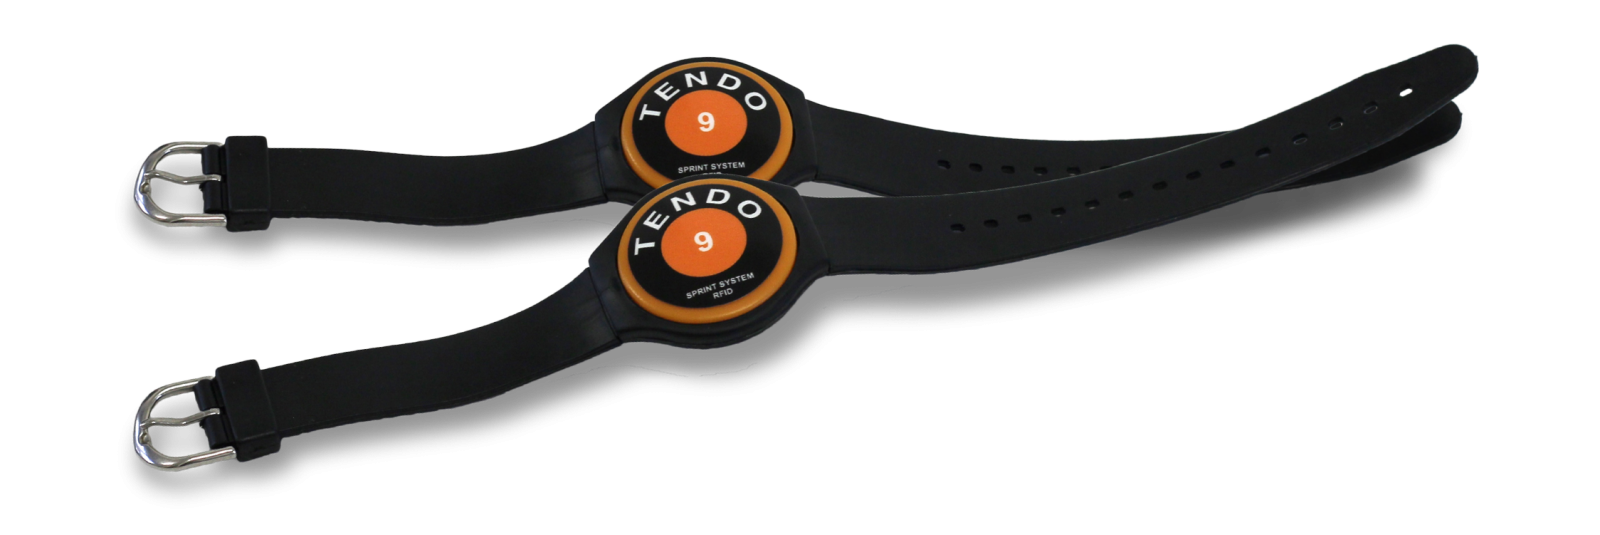 Two Tendo Sprint System RFID wrist bands for automatic recognition of athletes in training and testing by Tendo Sport